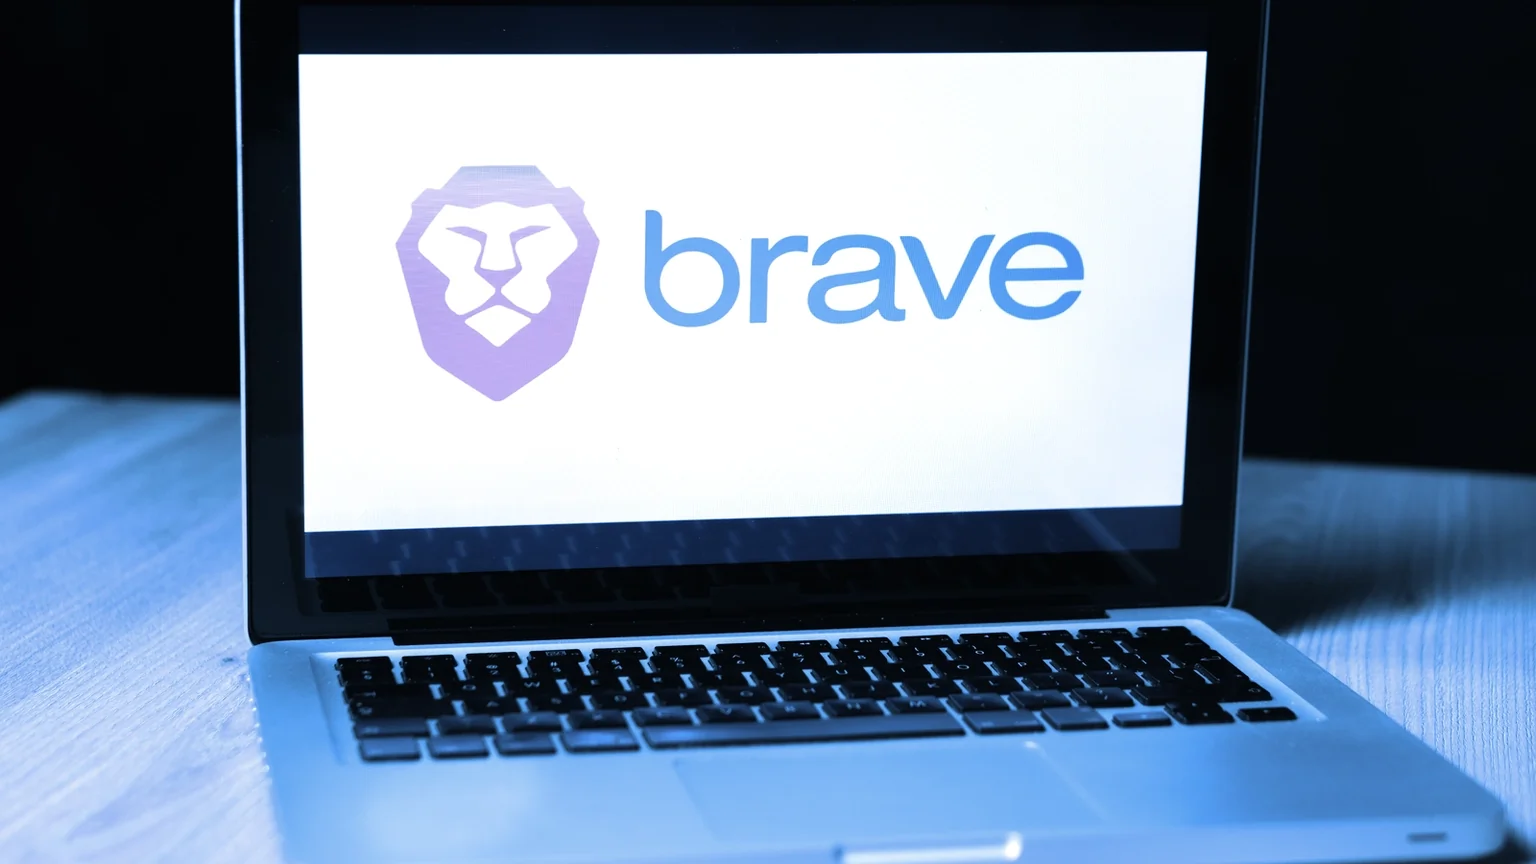 Brave is a crypto-powered, privacy-focused browser. Image: Shutterstock